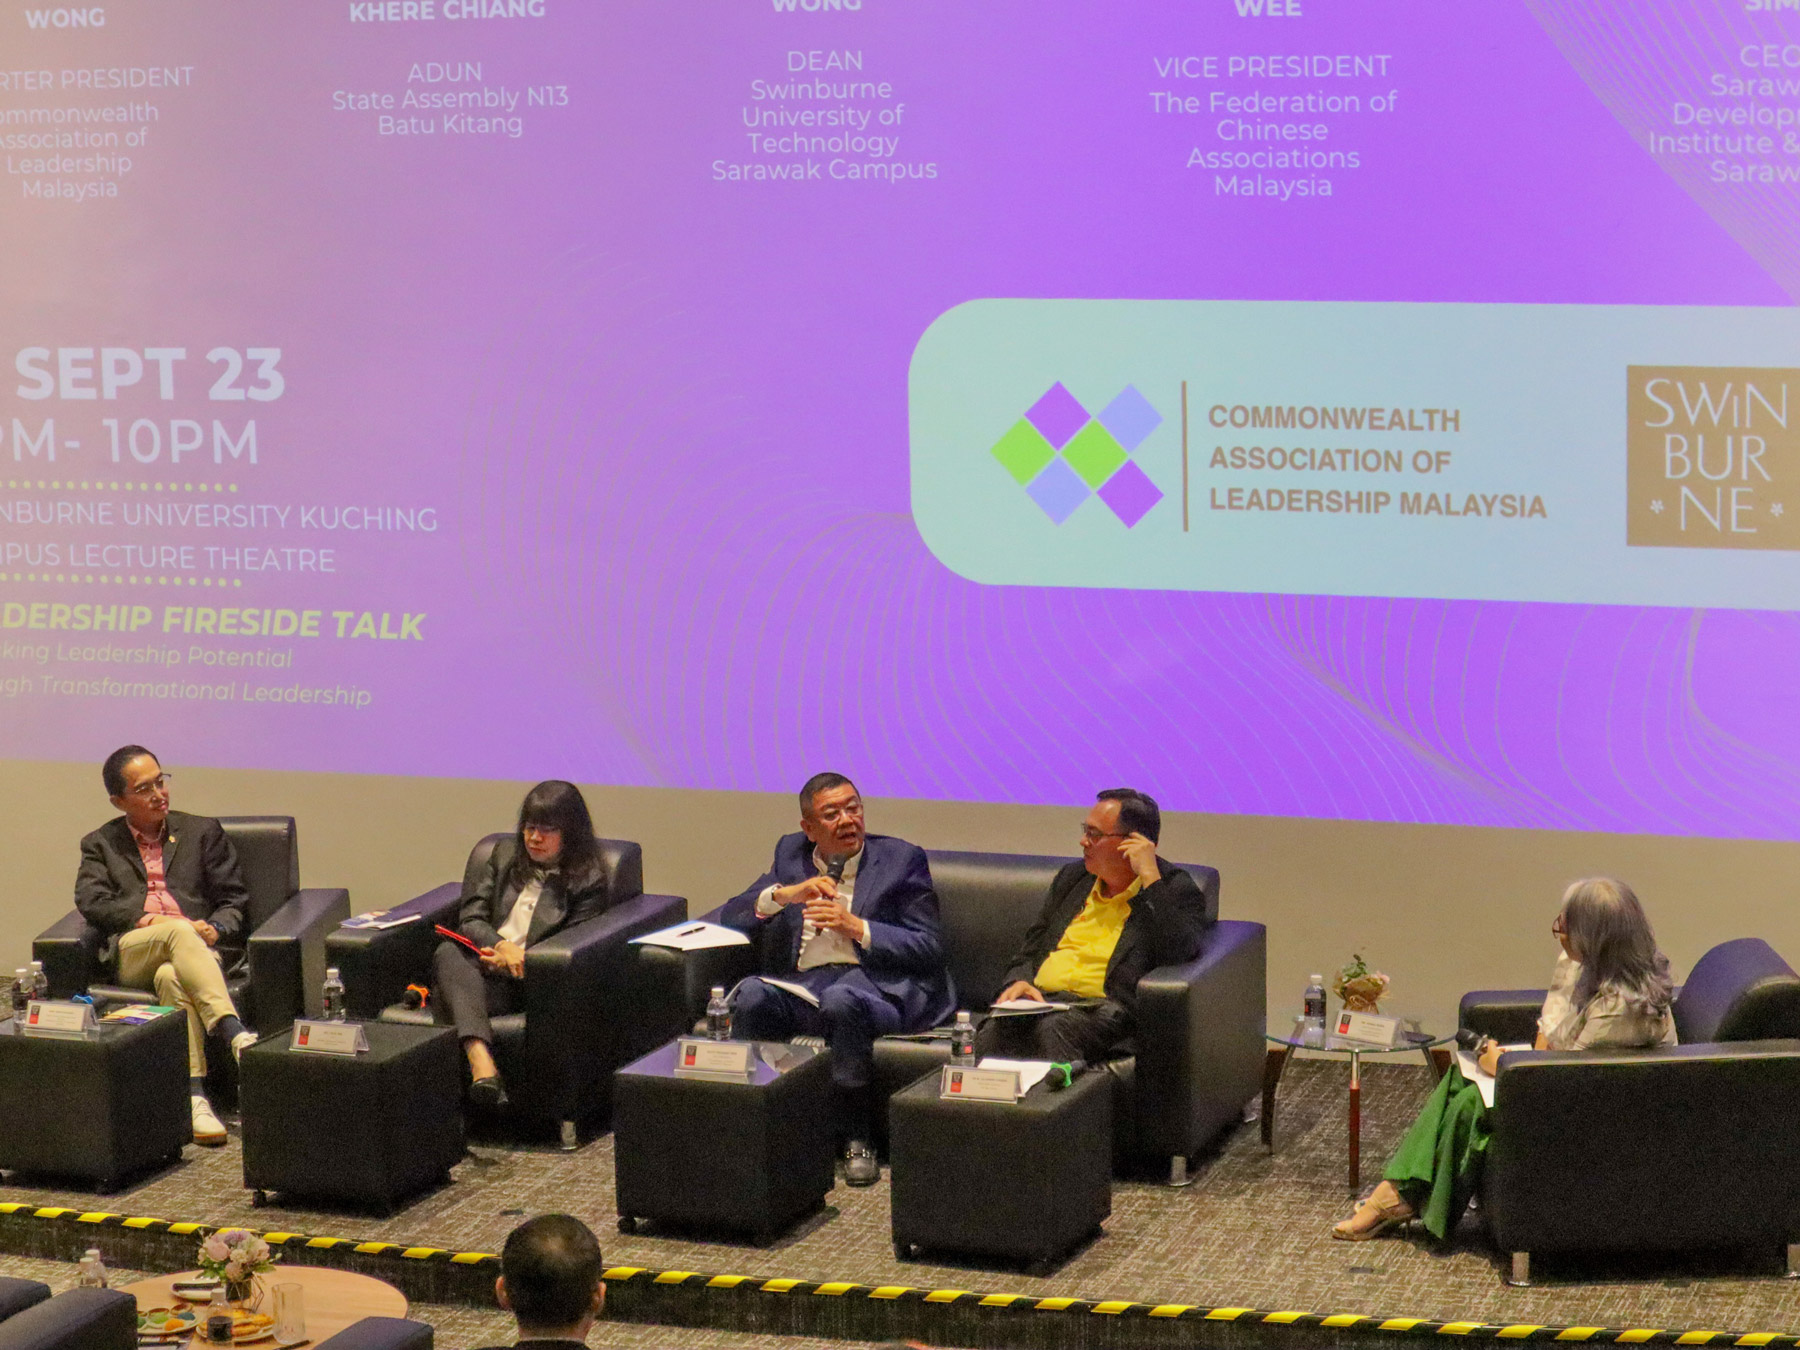 (From left) Professor Brian Wong Kee Mun, Ms Lelia Sim, Dato Richard Wee and YB Dato Ir Lo Khere Chiang deliver their insights during the Leadership Fireside Talk, moderated by Ms Hanaa Wong (right). 